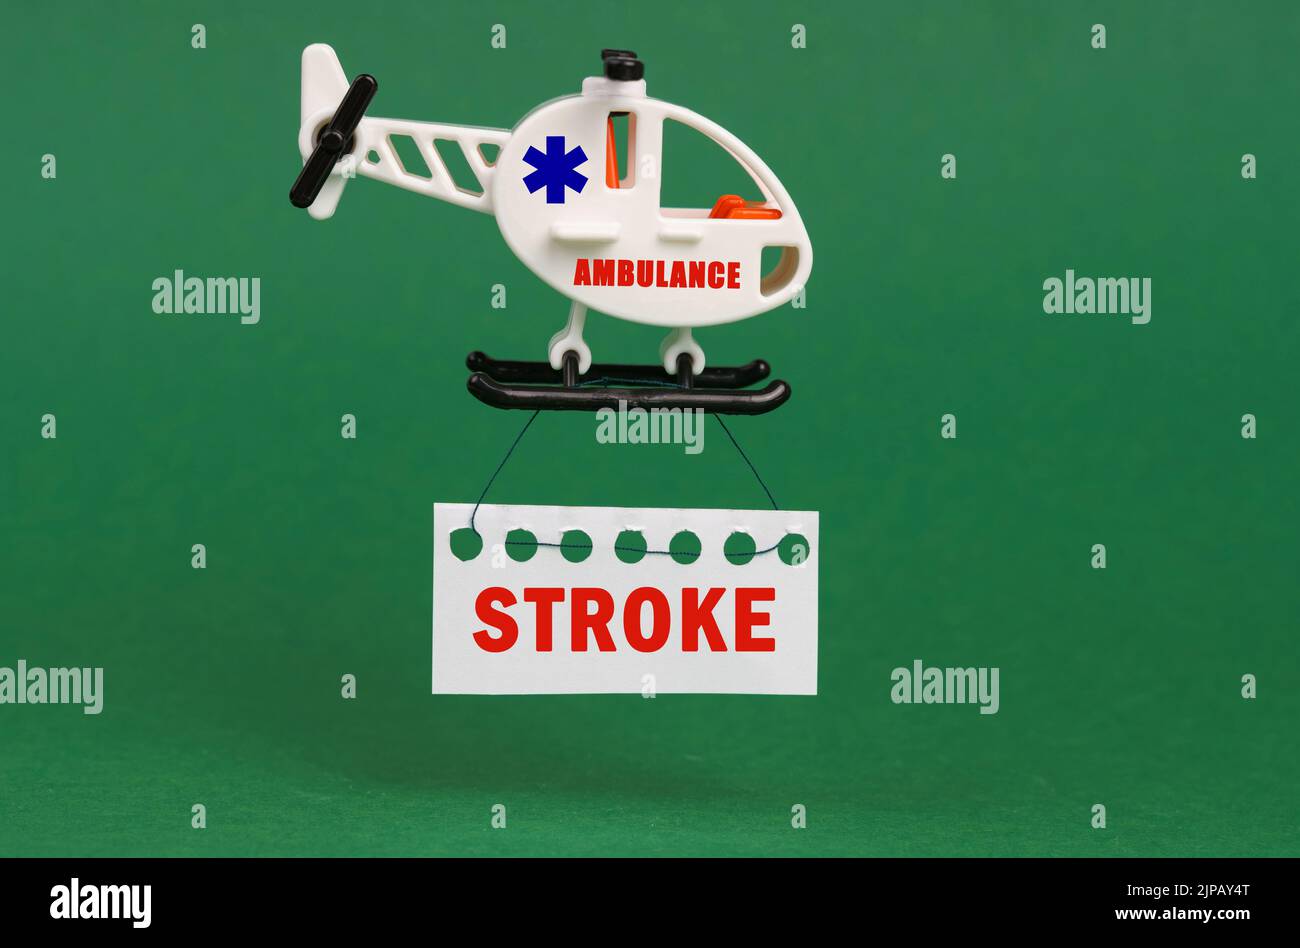 Medical concept. On a green surface, an ambulance helicopter with a sign - STROKE Stock Photo